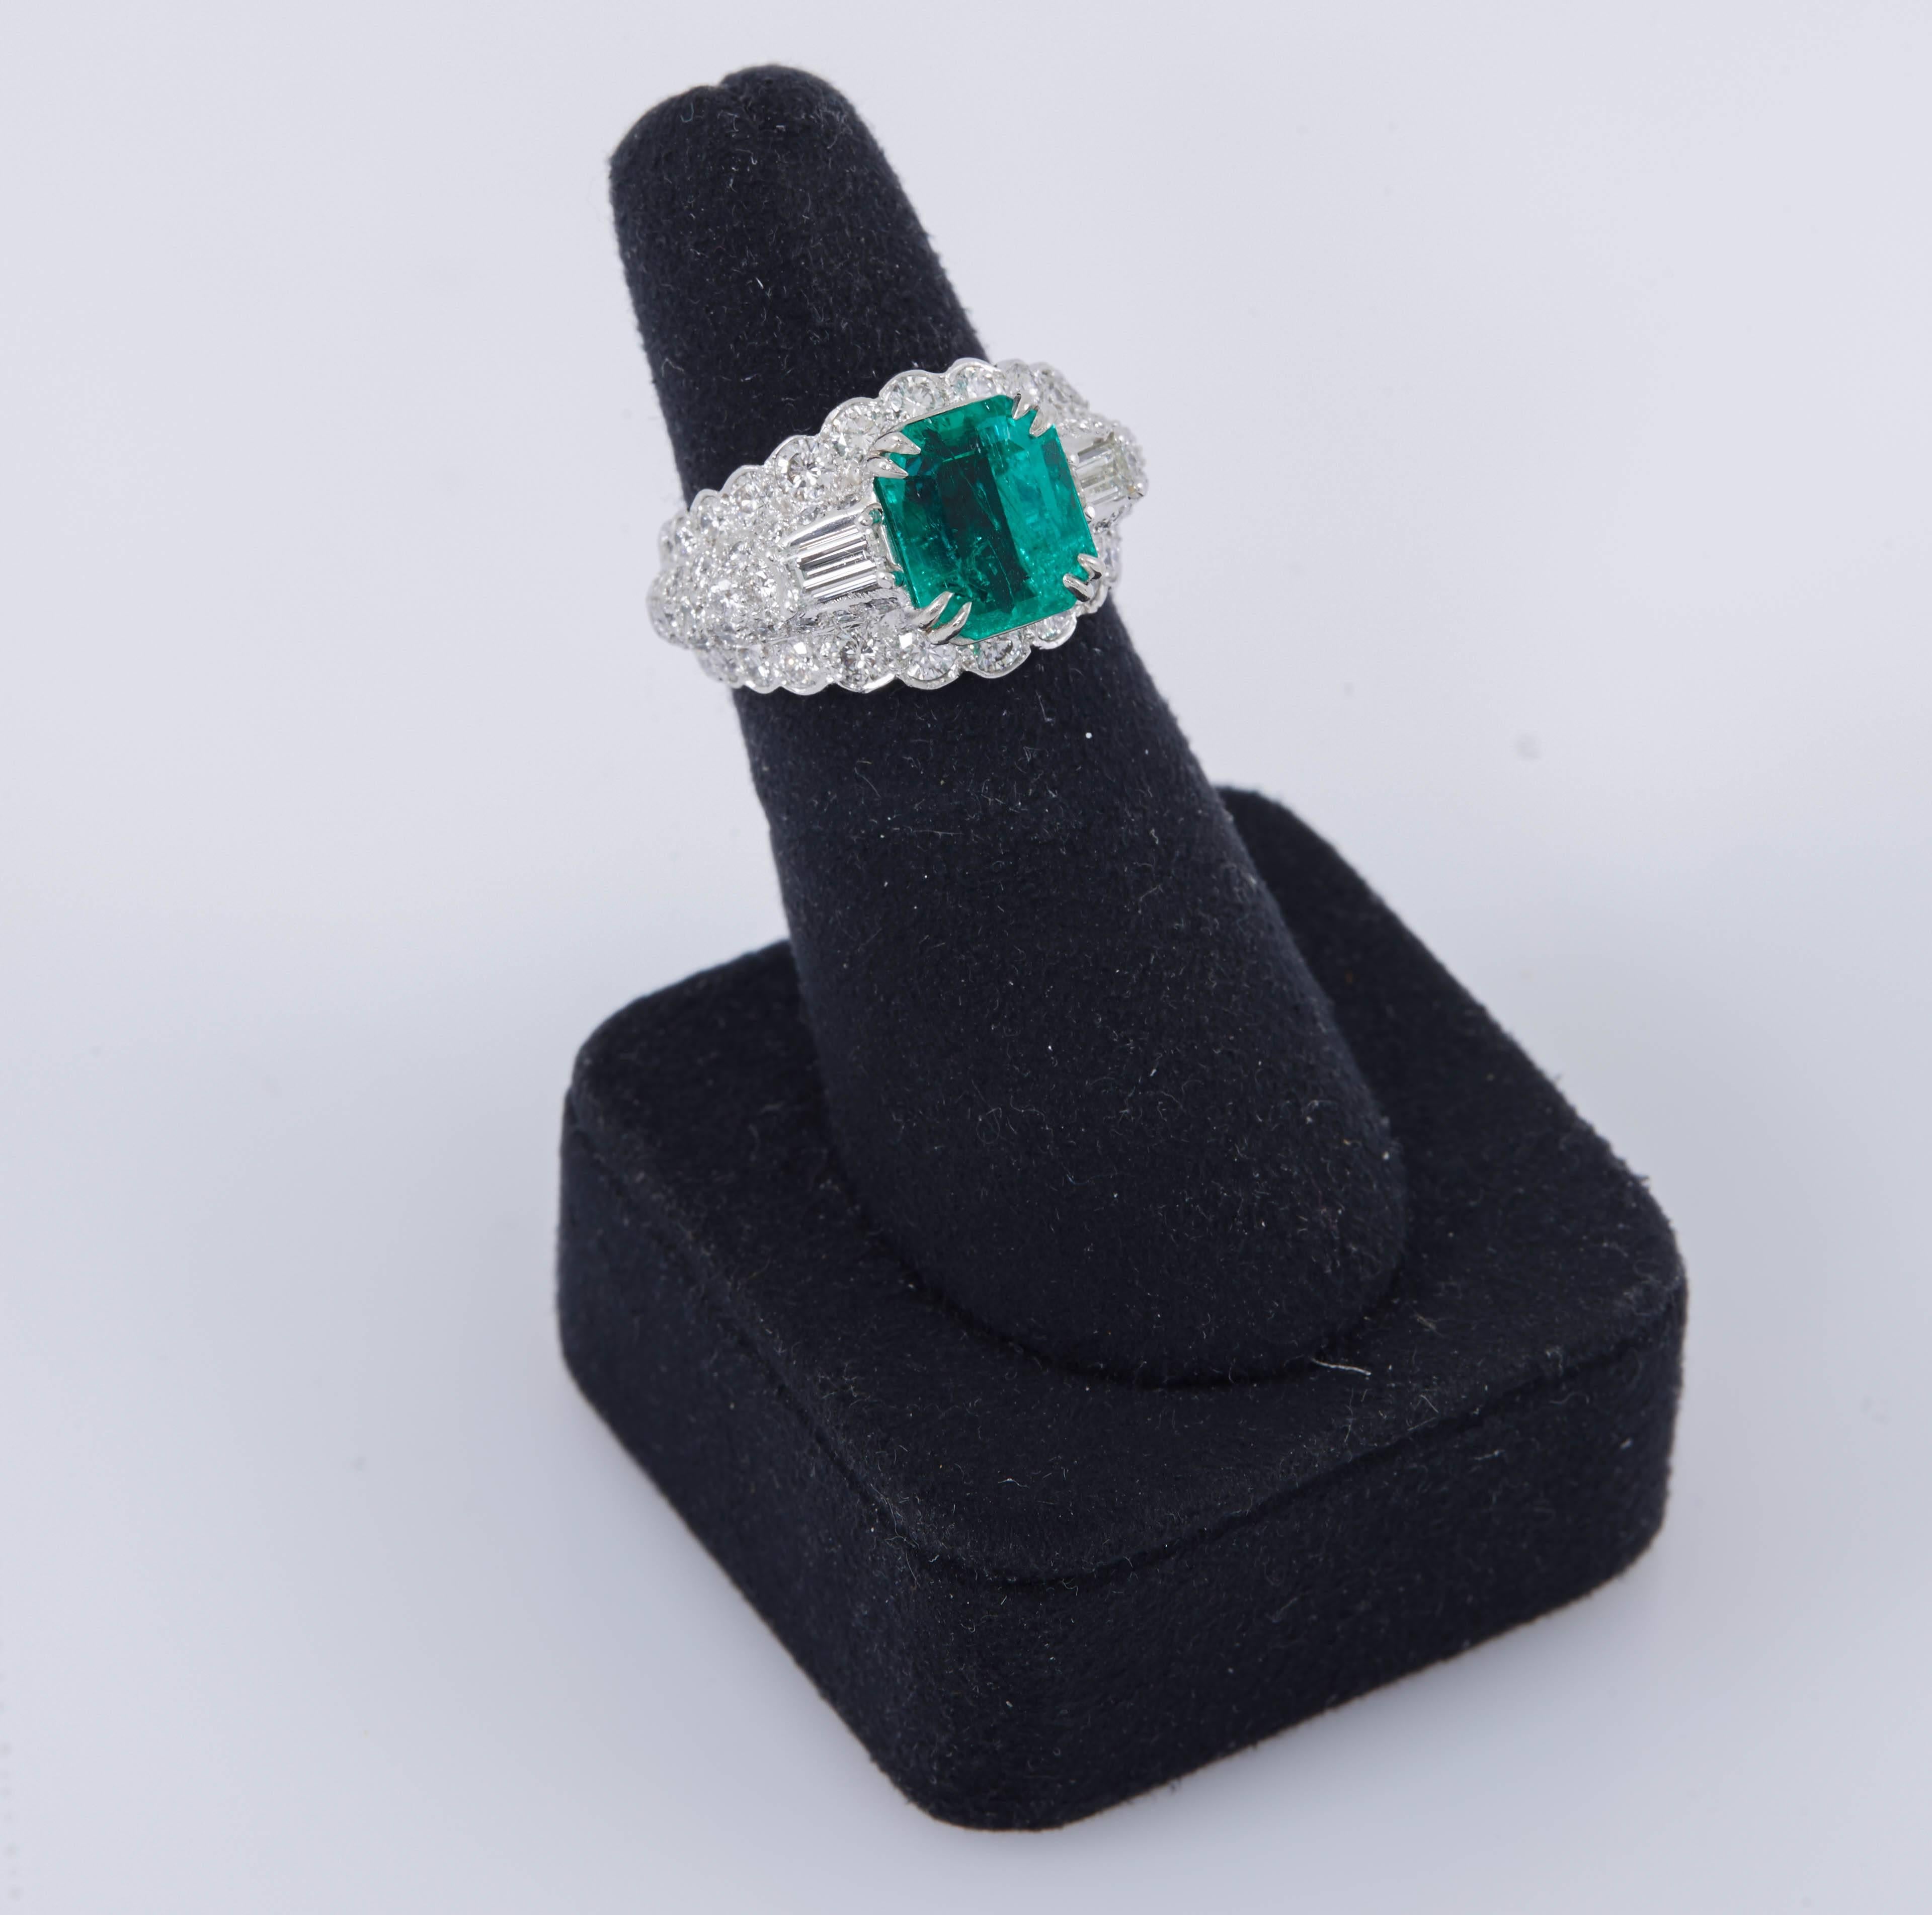 Unique piece from David's Webb high-end collection is centering Natural Emerald cut Green Emerald, weighing approximately 6.00 carat. The center stone is set in beautiful mounting crafted in platinum with high quality, round brilliant and baguette